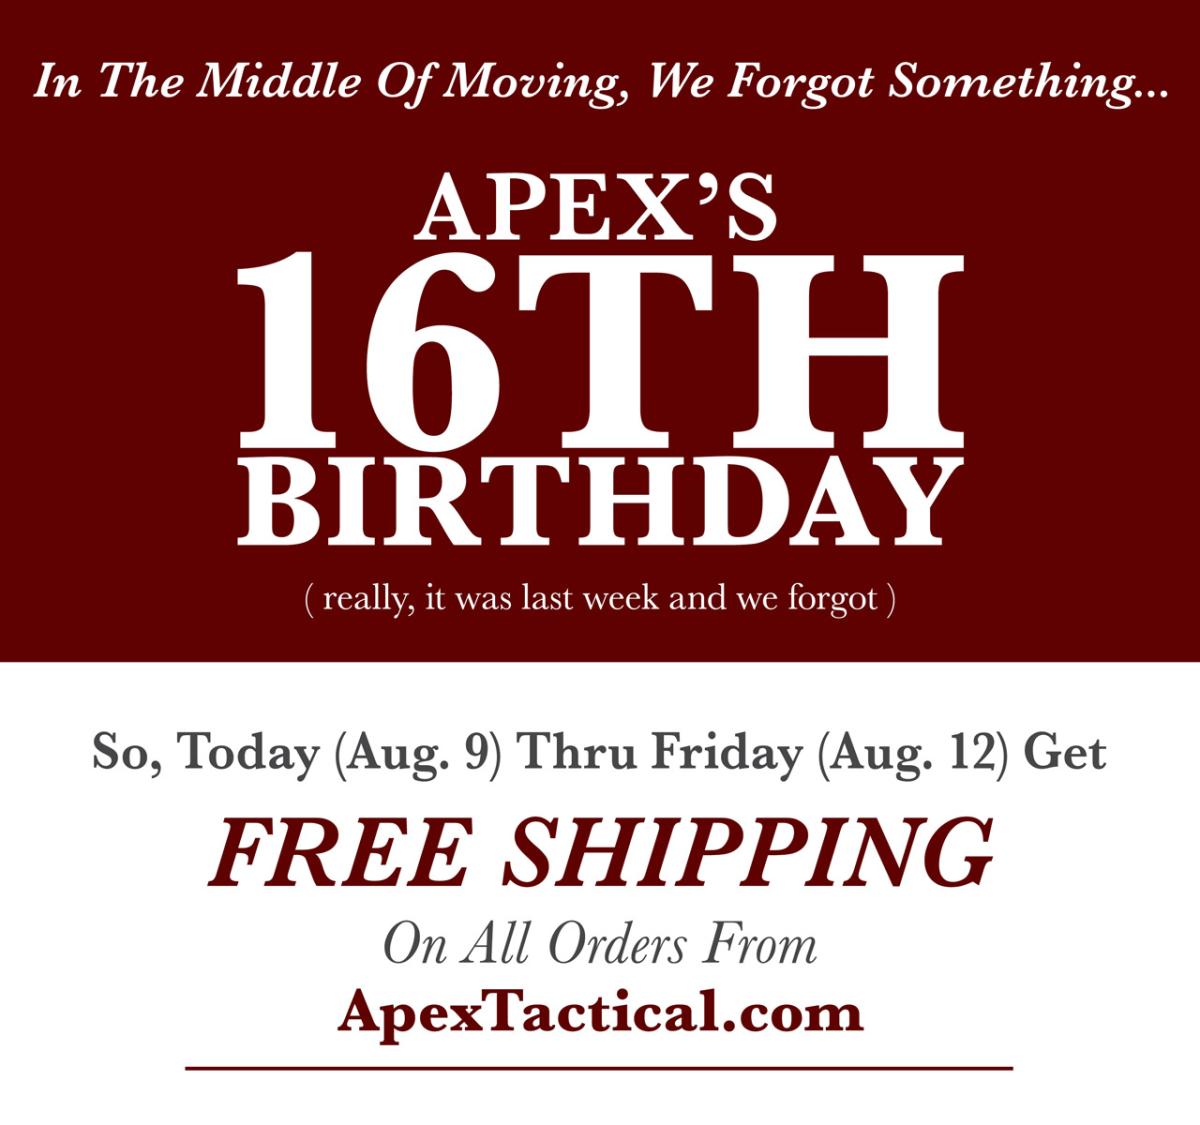 Apex Marks 16th Anniversary With Free Shipping At ApexTactical.com